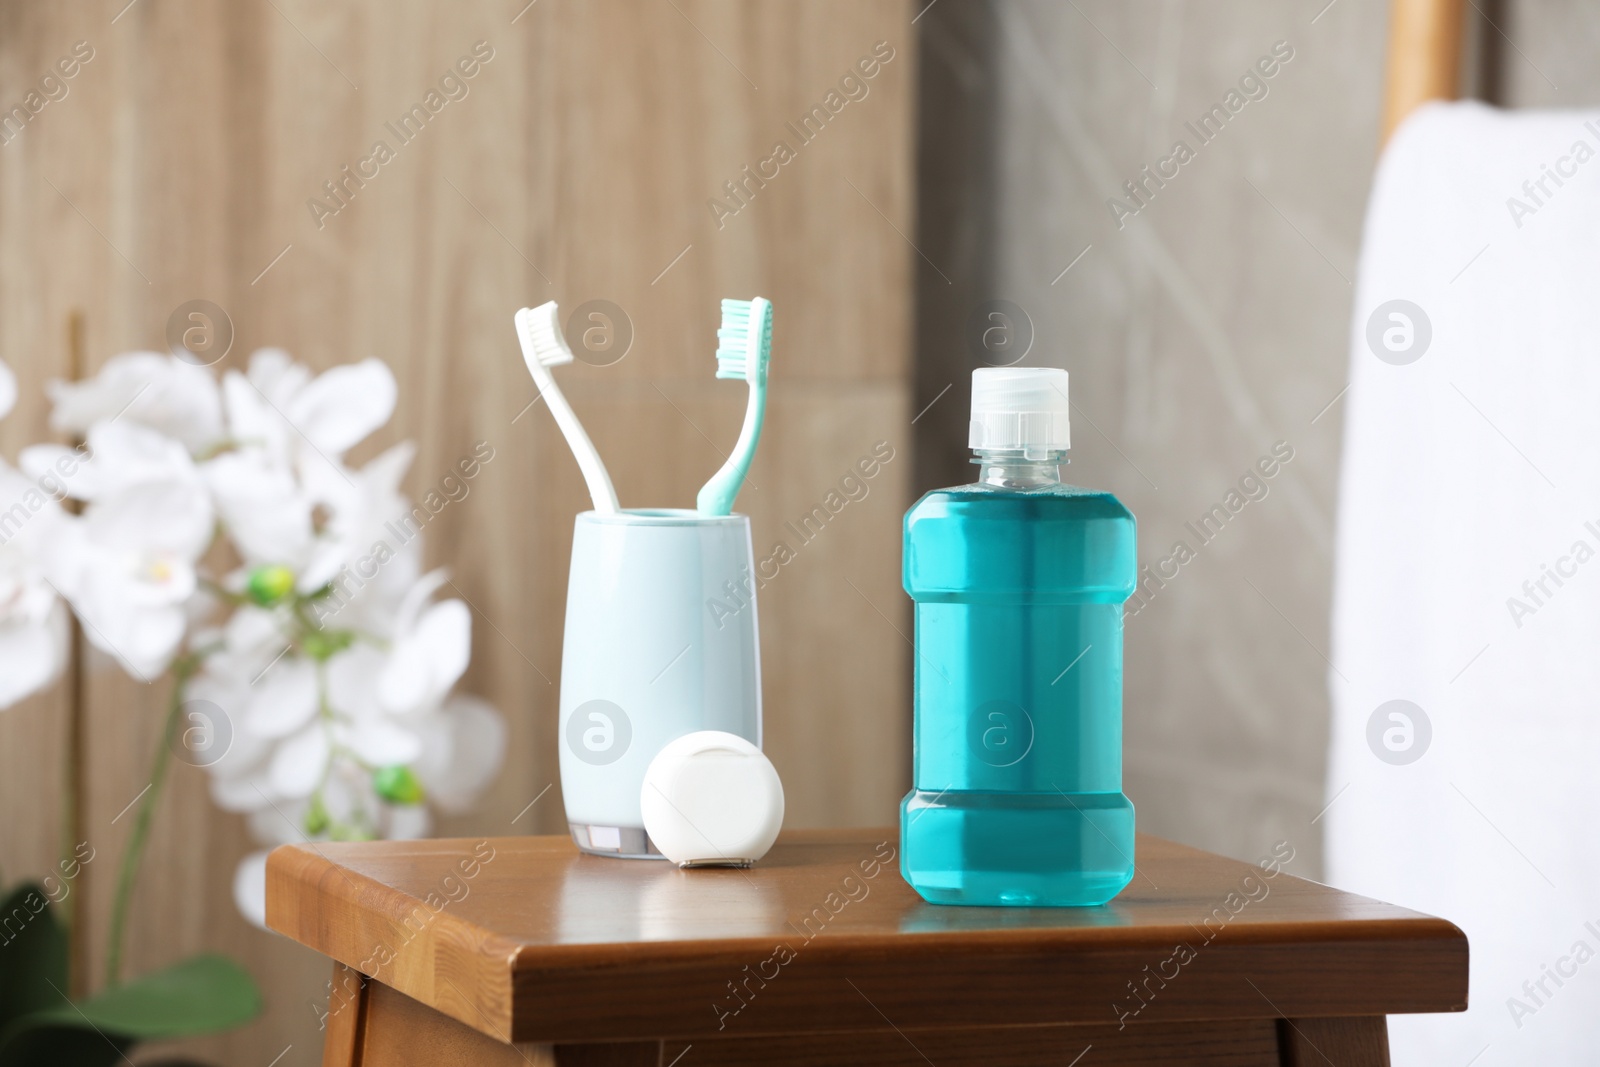 Photo of Bottle of mouthwash, toothbrushes and dental floss on wooden table in bathroom